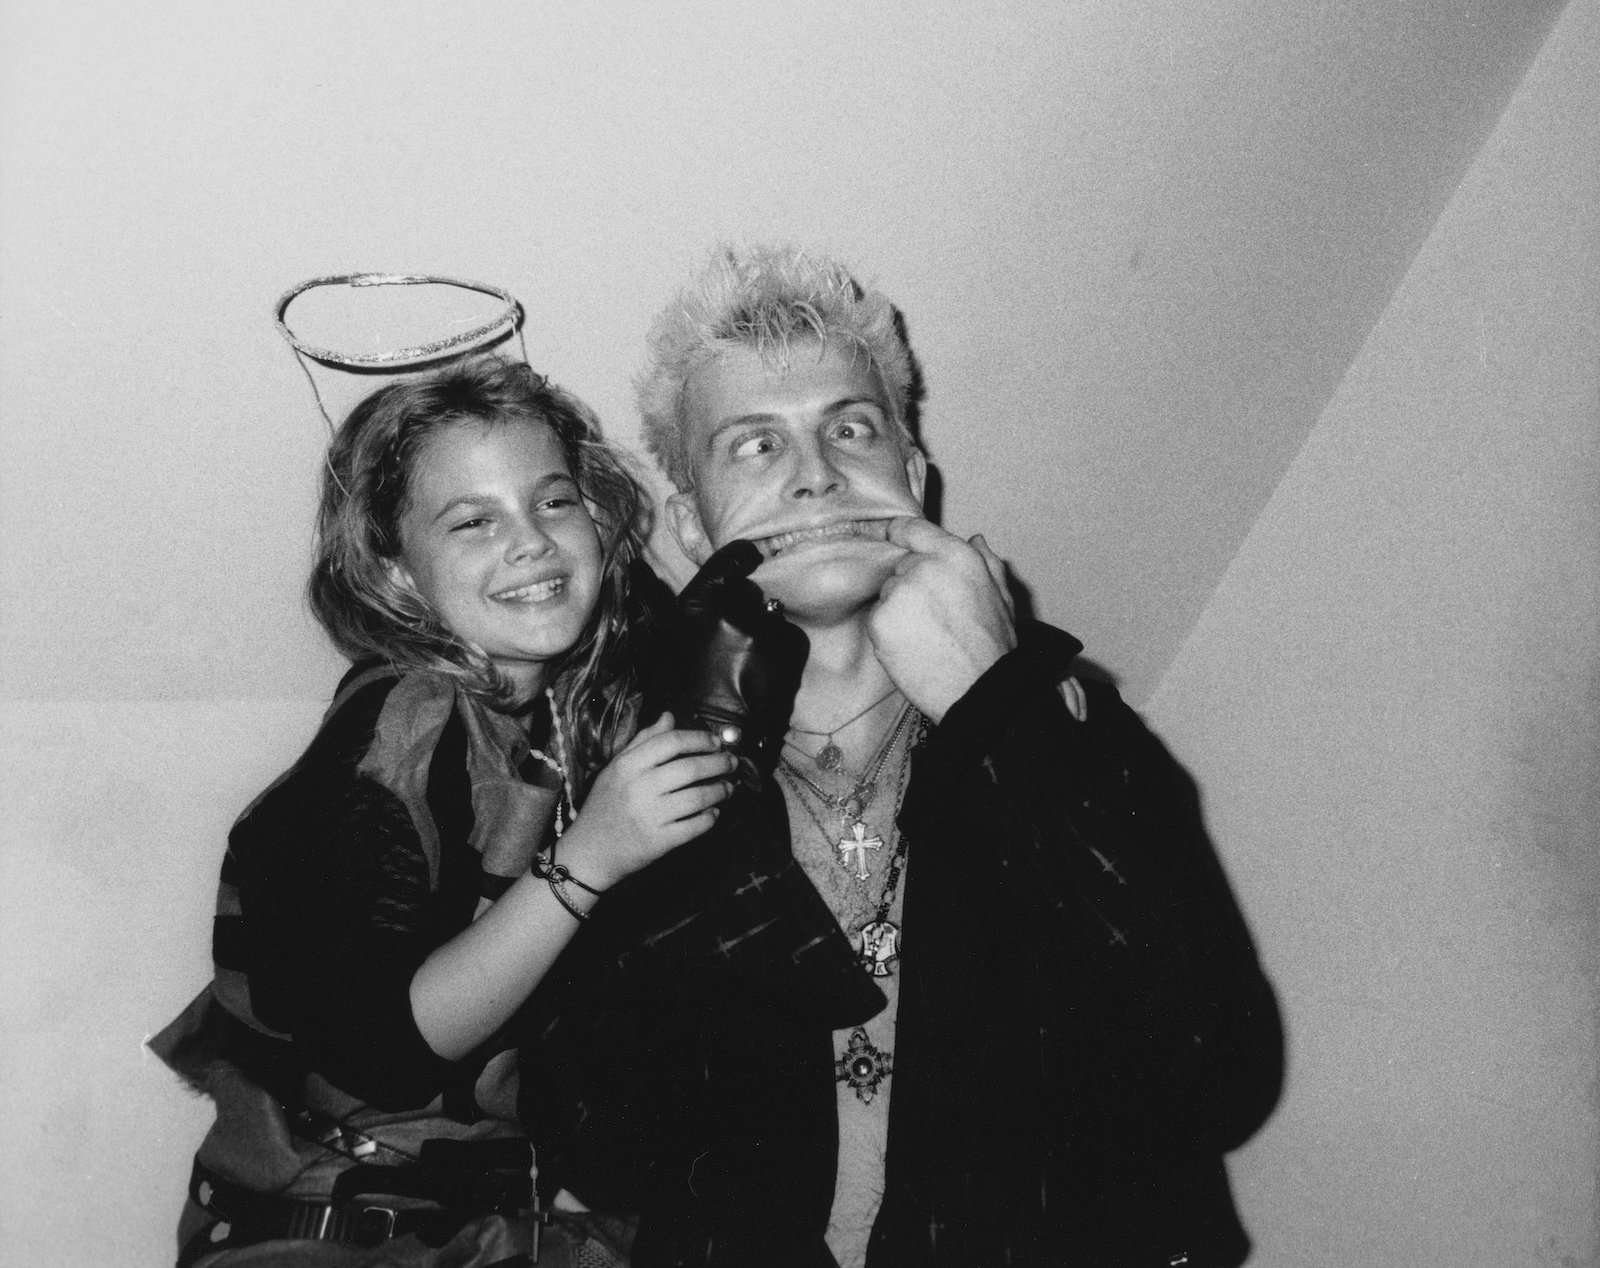 Drew Barrymore with Billy Idol at nightclub Limelight in 1986